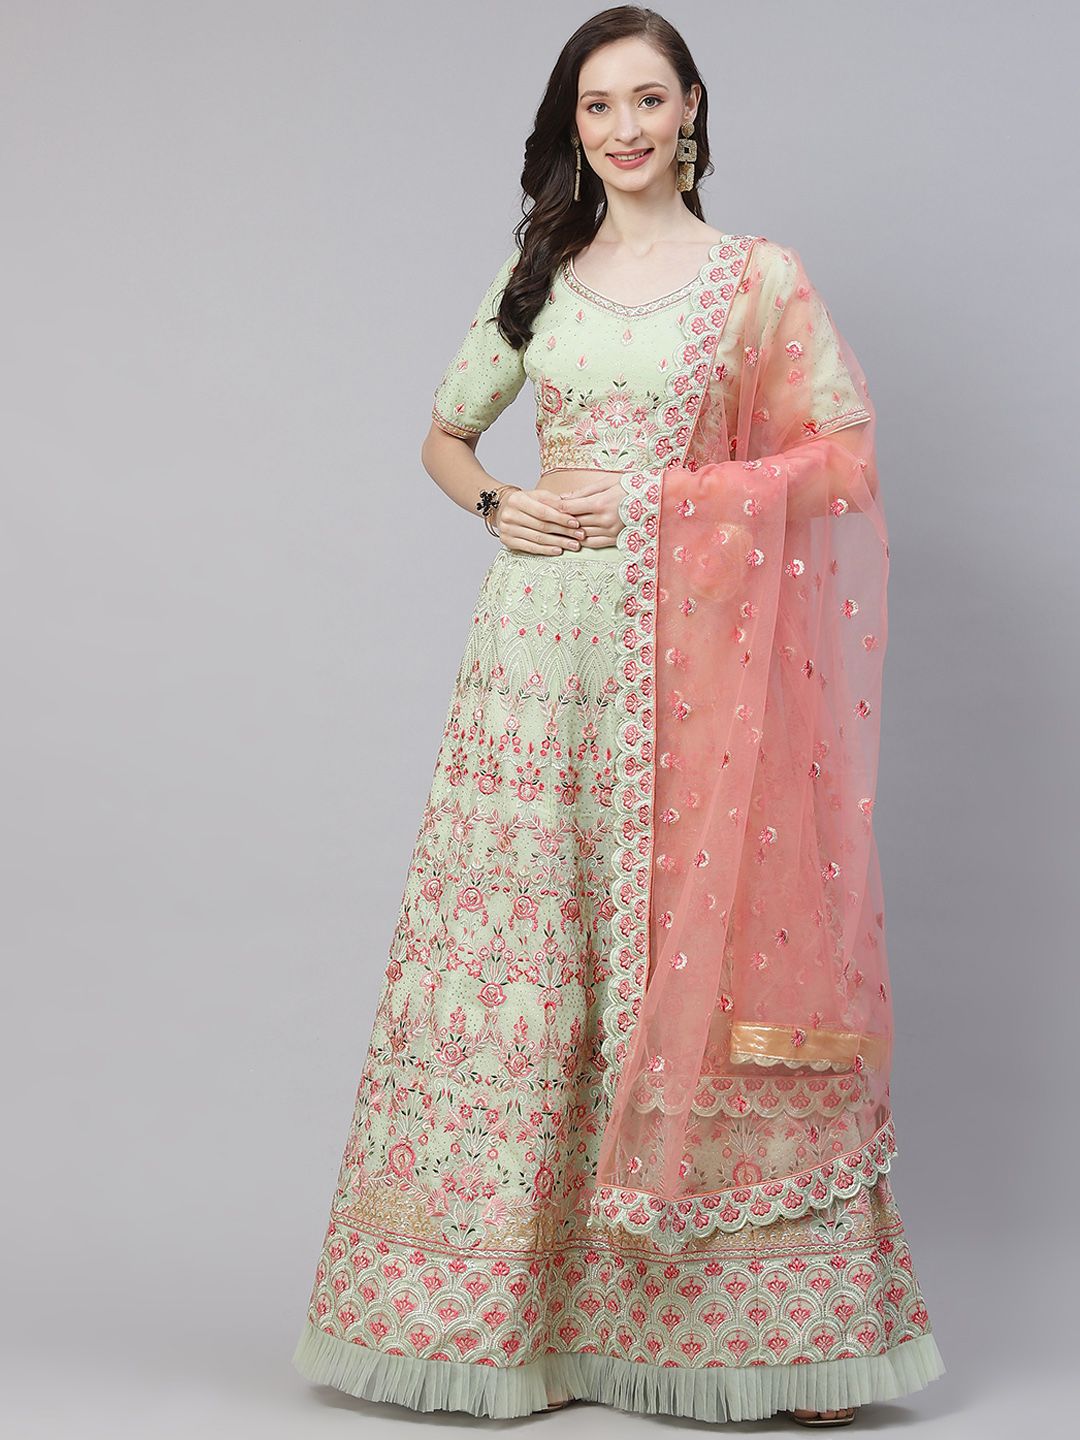 Readiprint Fashions Green & Pink Embroidered Beads and Stones Semi-Stitched Lehenga & Unstitched Blouse With Price in India